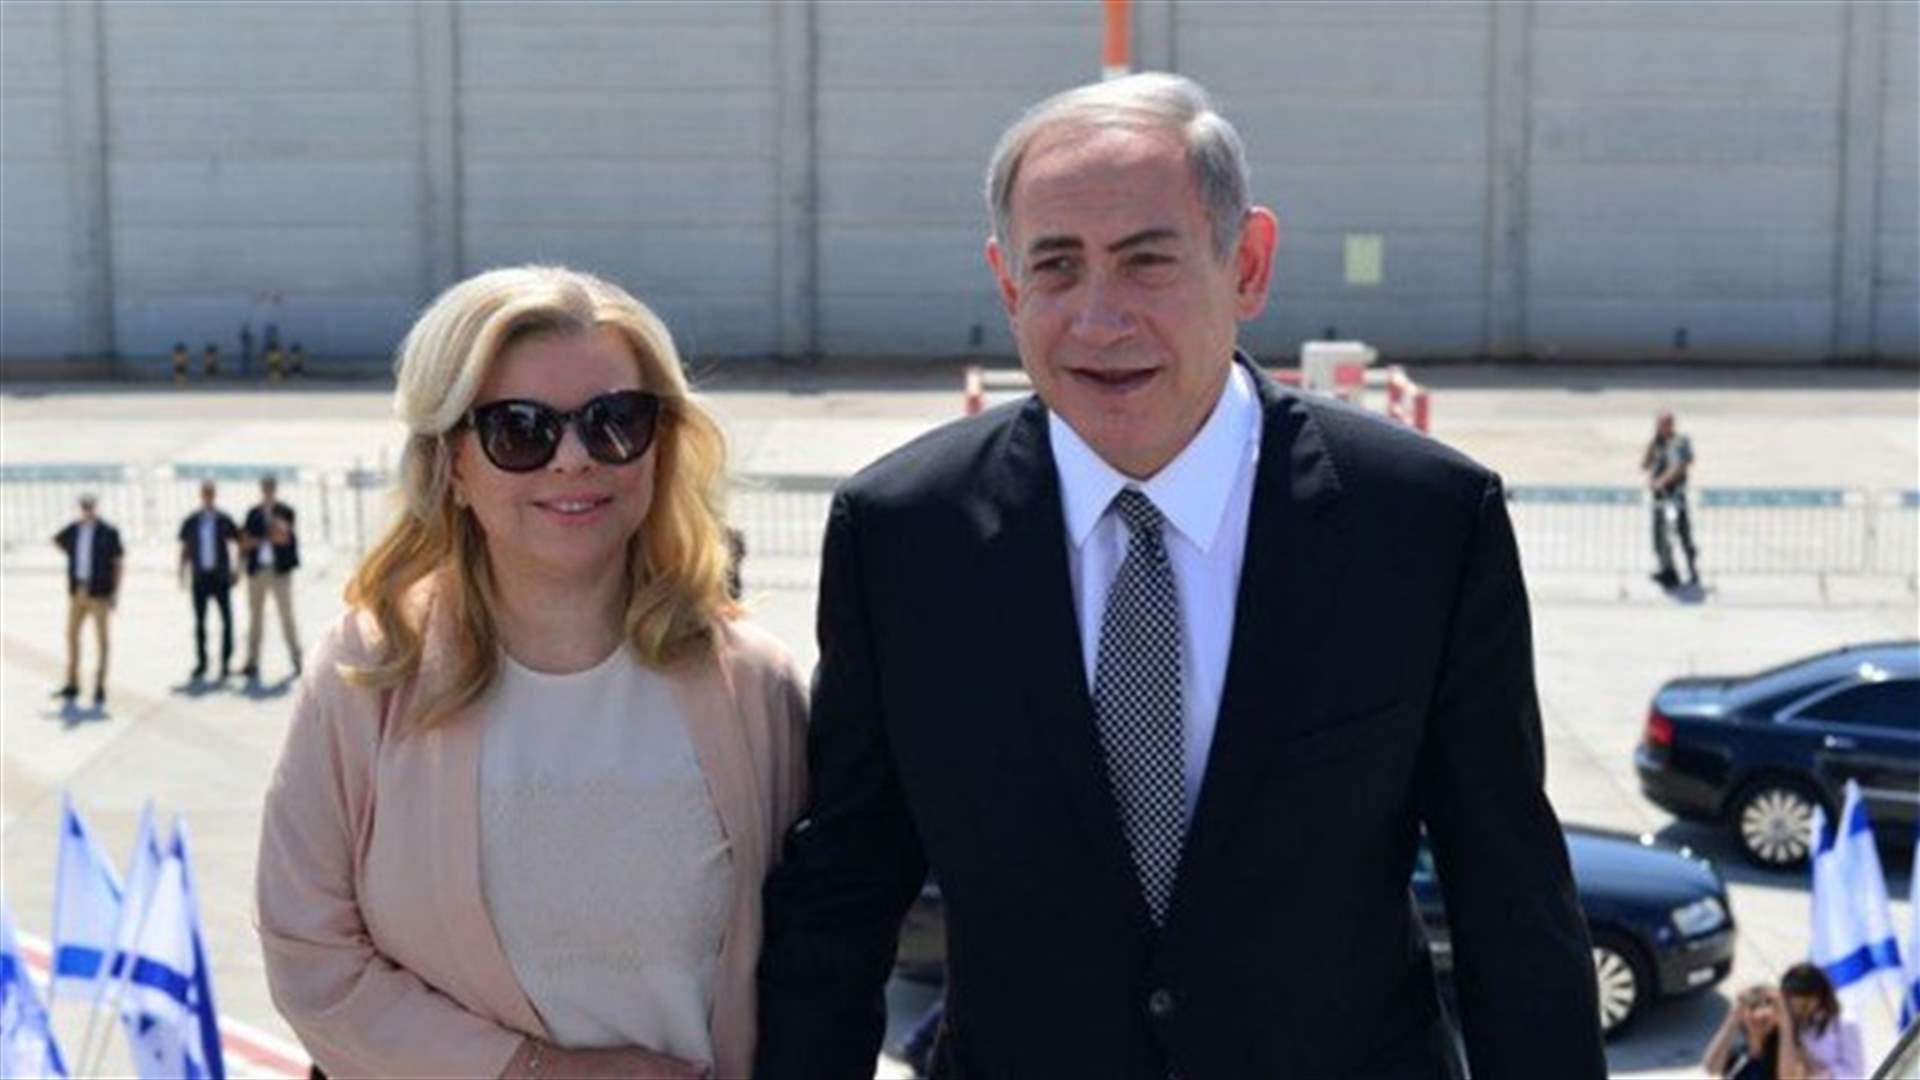 Israel&#39;s Netanyahu in a spin over dirty laundry